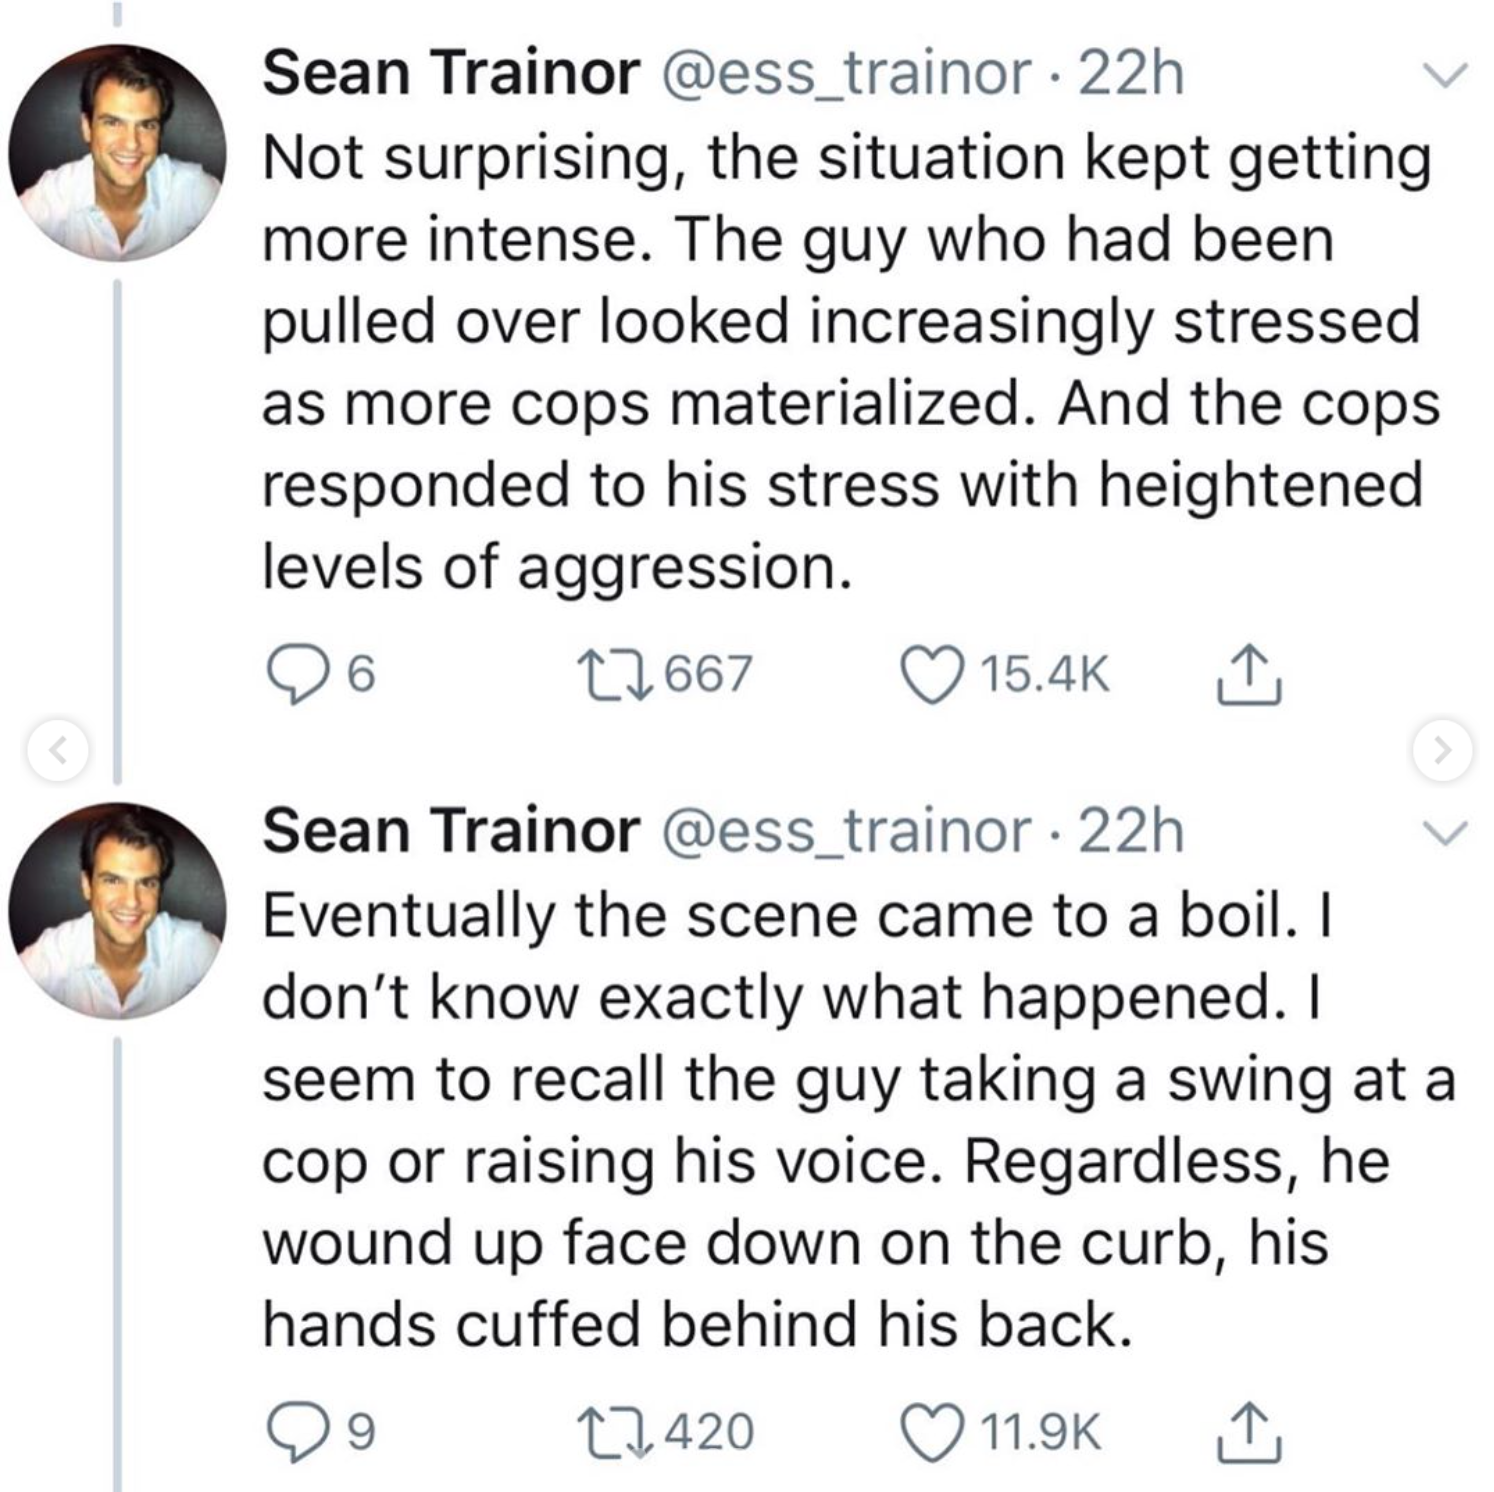 point - Sean Trainor 22h Not surprising, the situation kept getting more intense. The guy who had been pulled over looked increasingly stressed as more cops materialized. And the cops responded to his stress with heightened levels of aggression. 6 12667 S